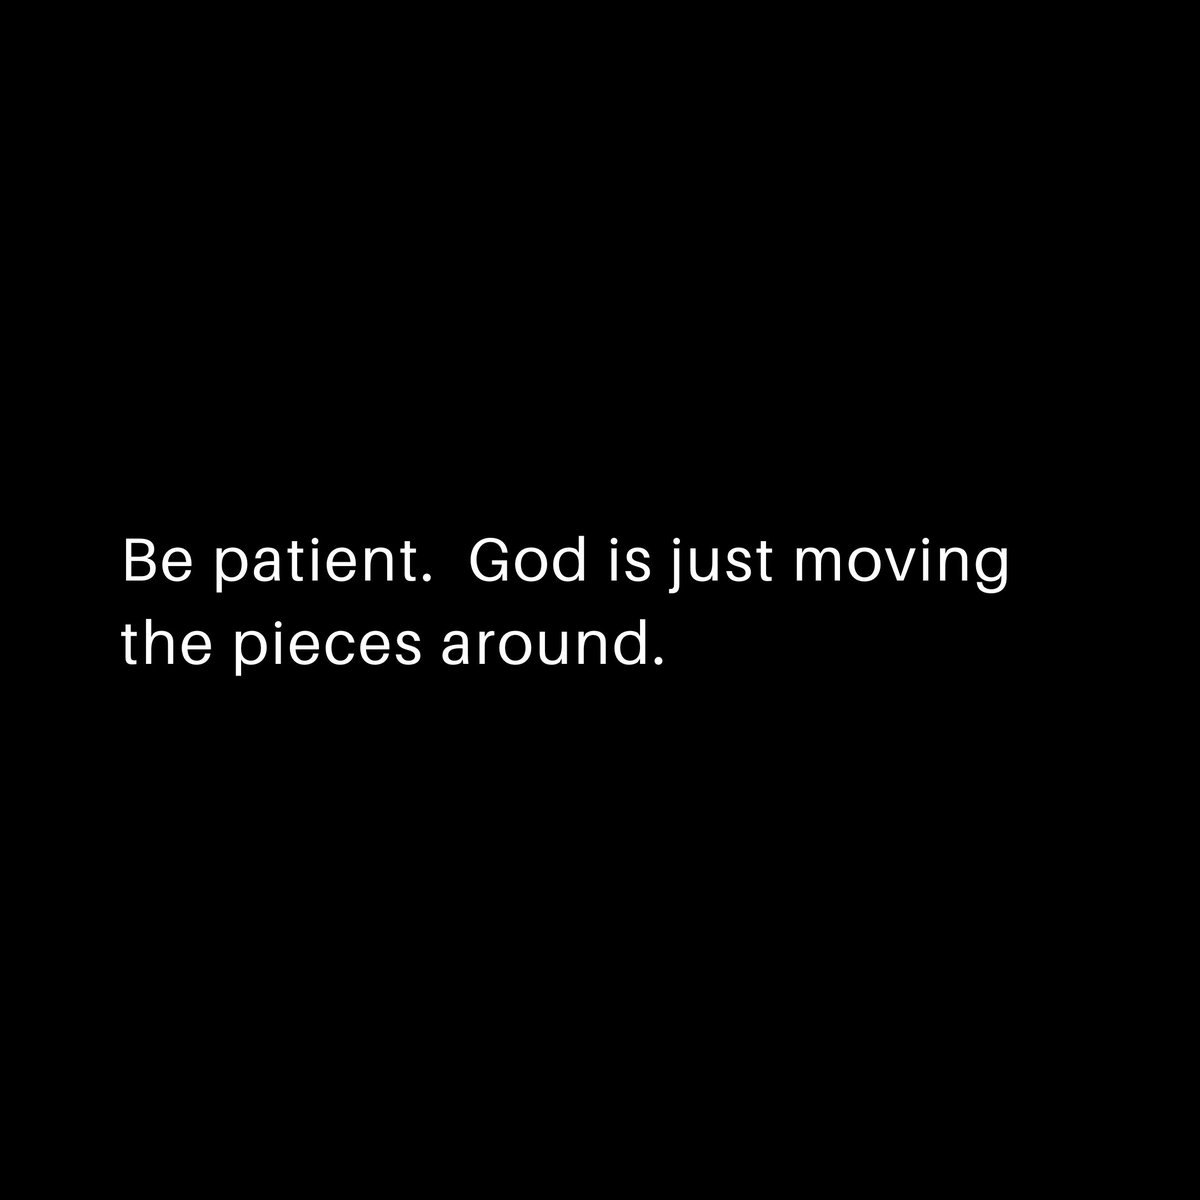 RT @wiseconnector: Be patient https://t.co/yUp5olsGY9